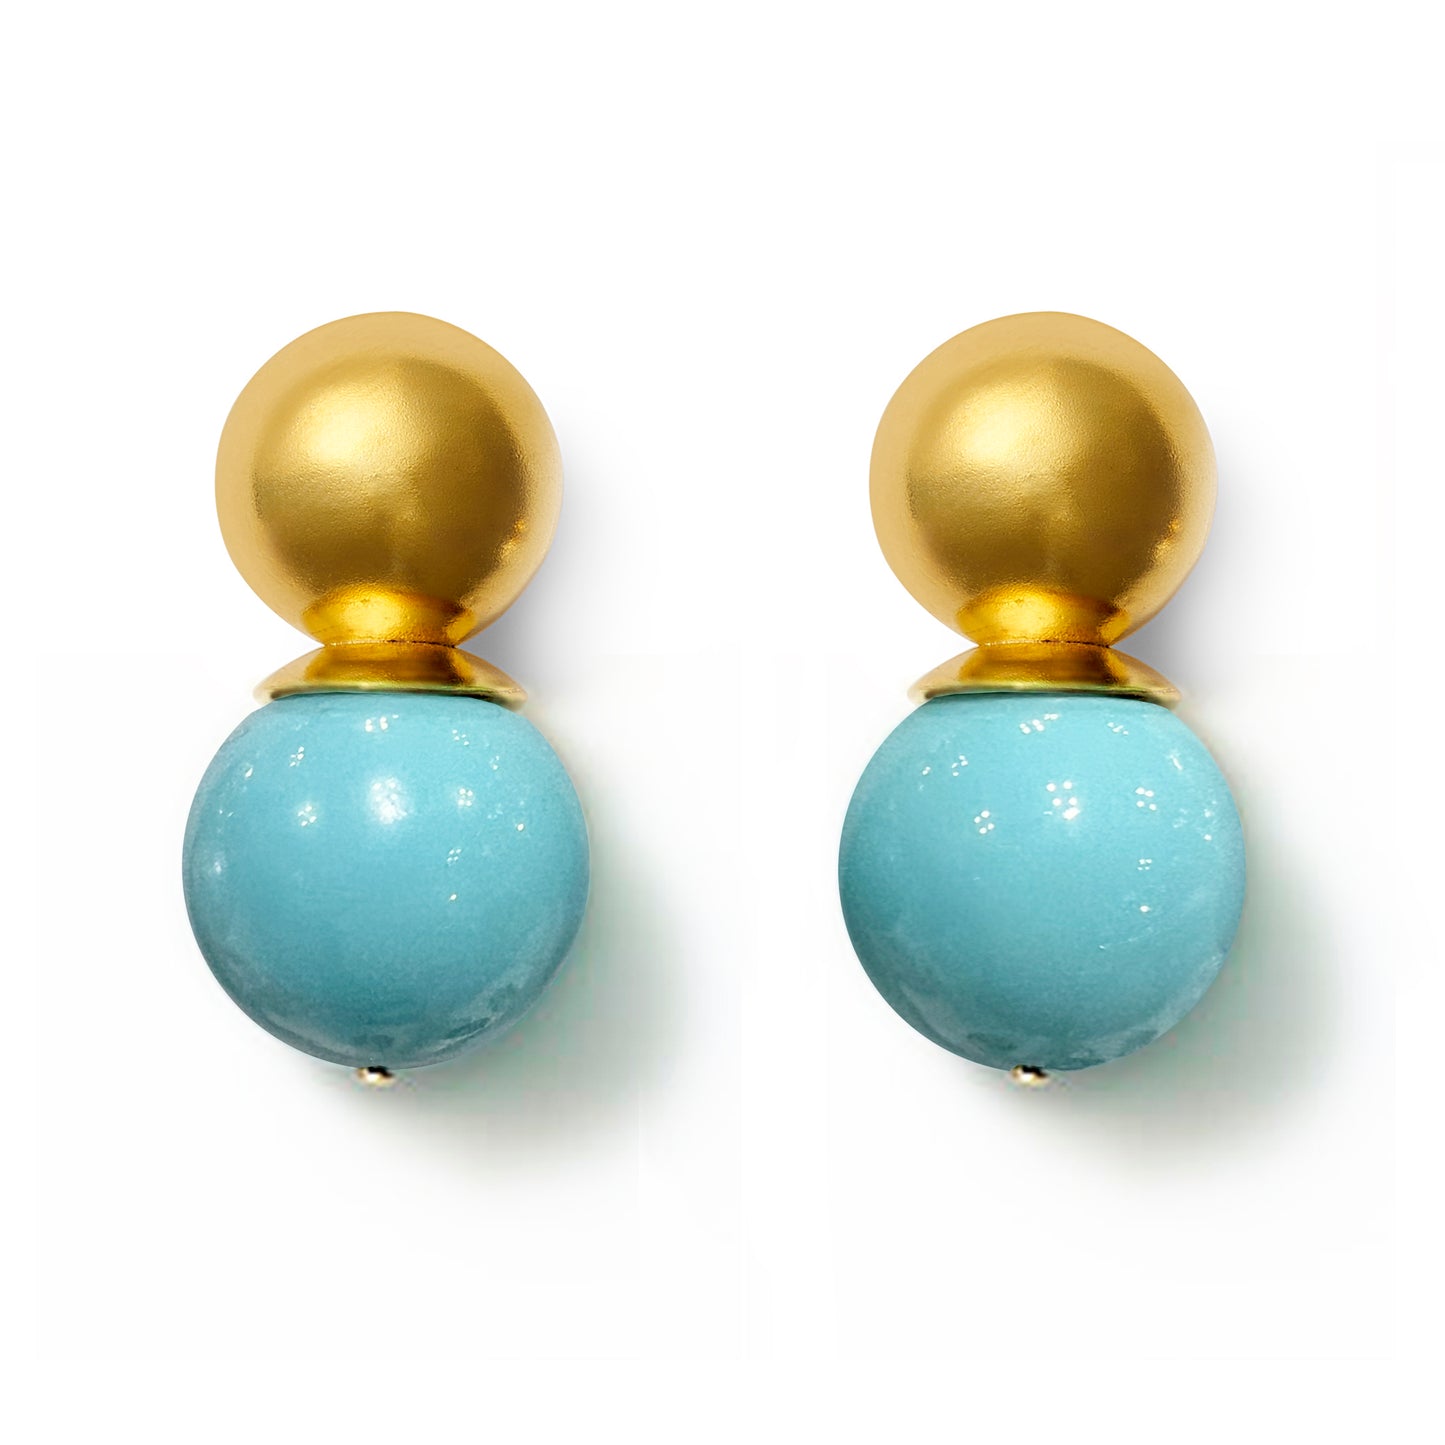 Gold Lady Earrings Turquoise